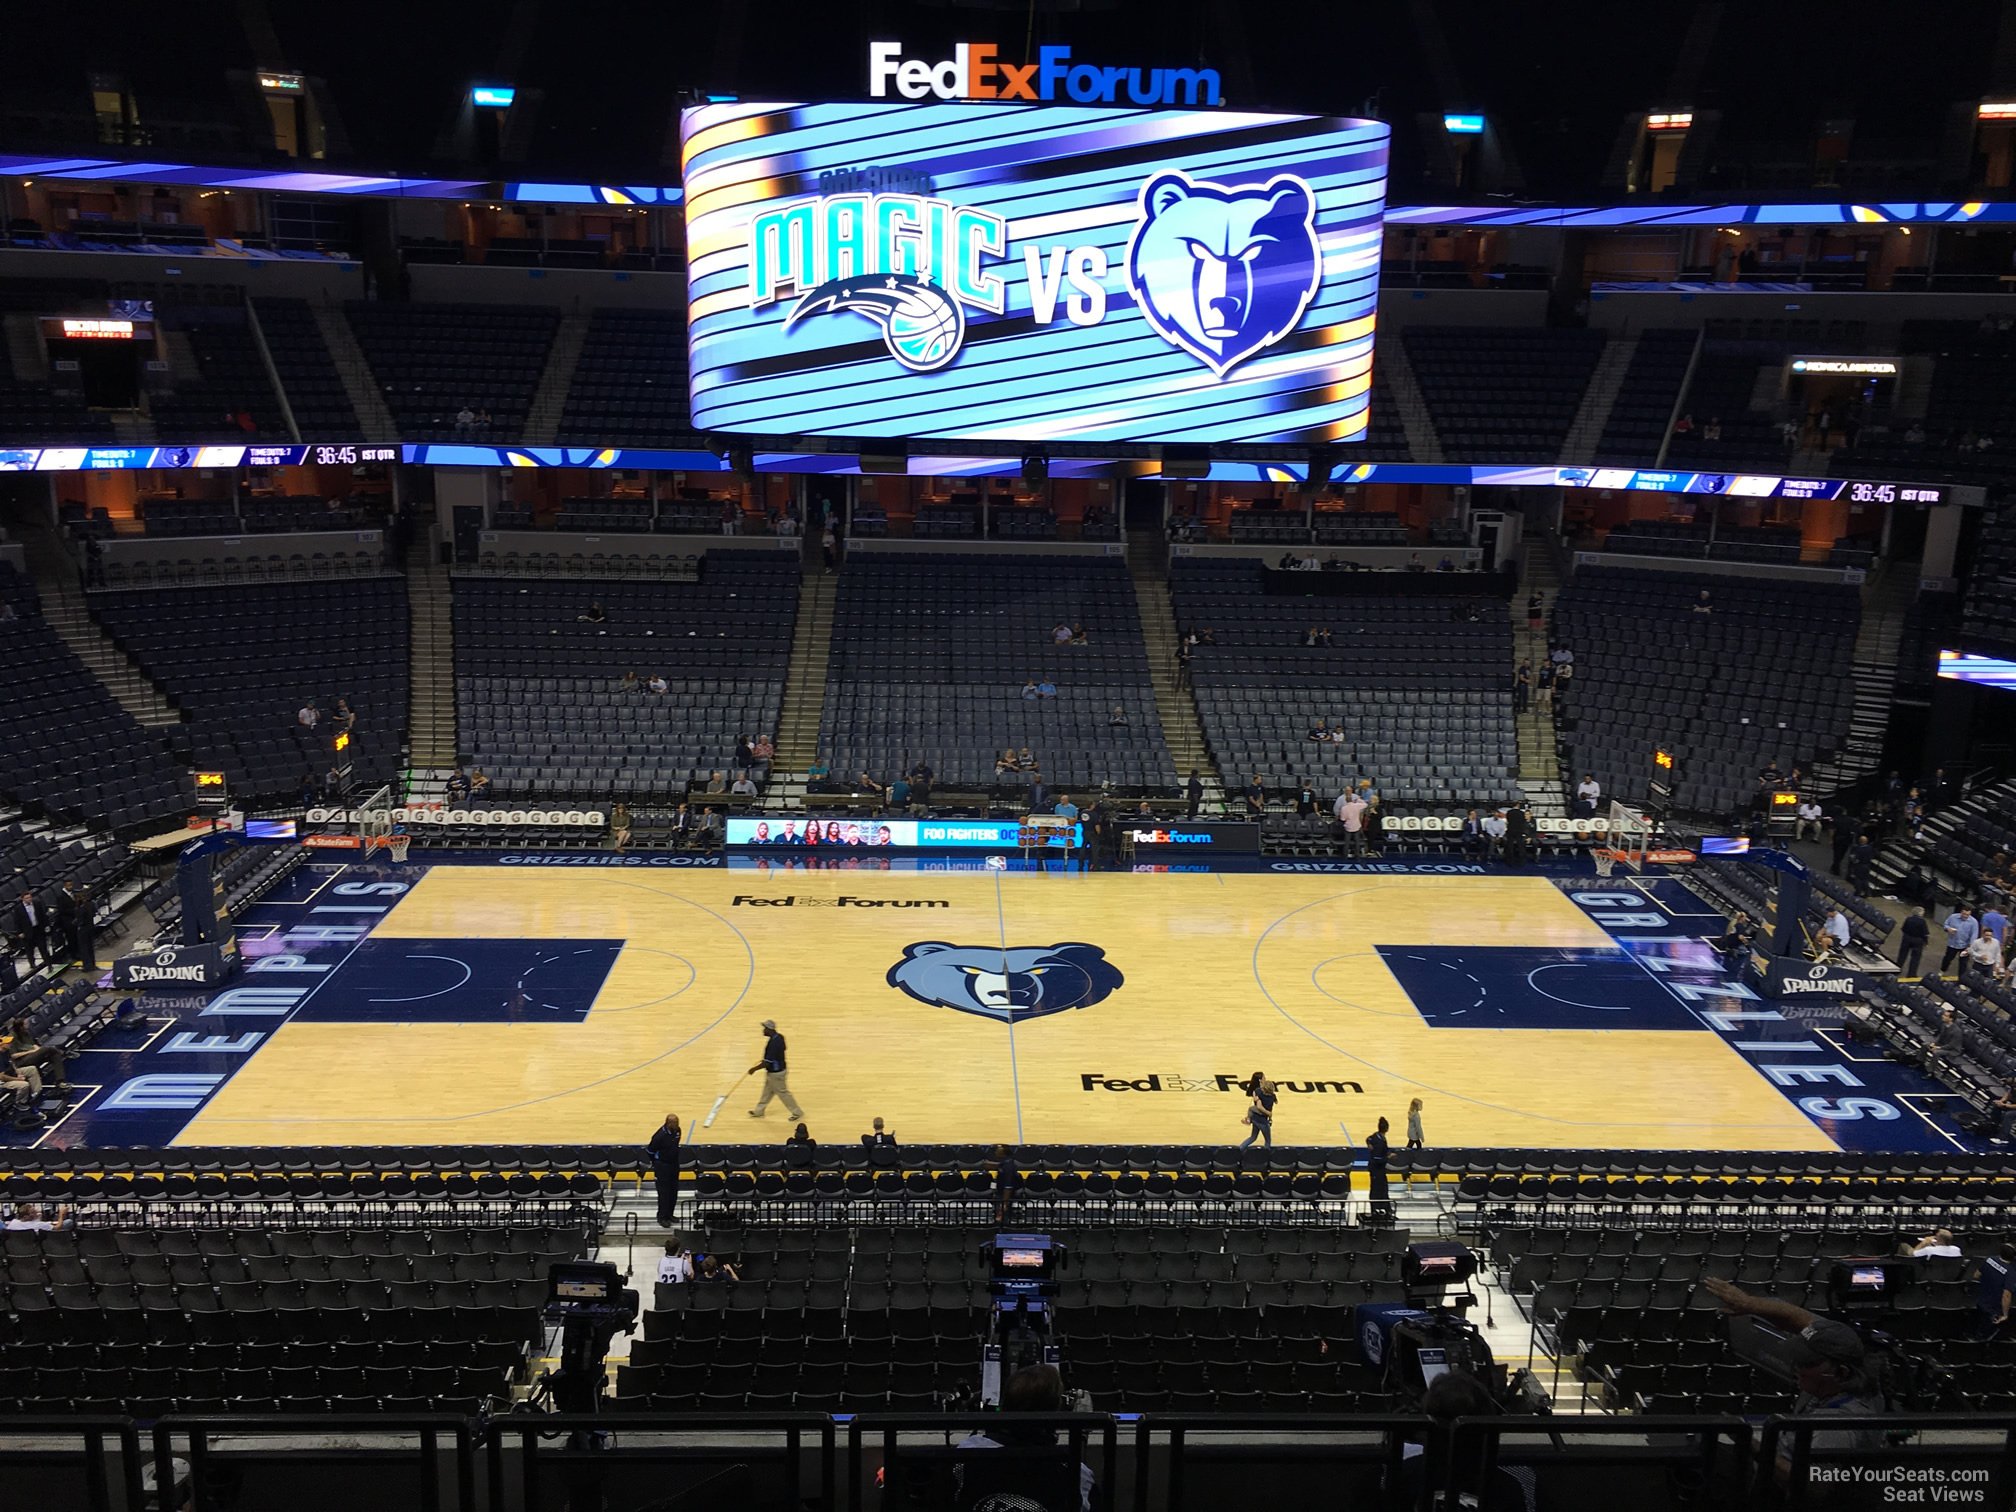 section p11, row h seat view  for basketball - fedex forum